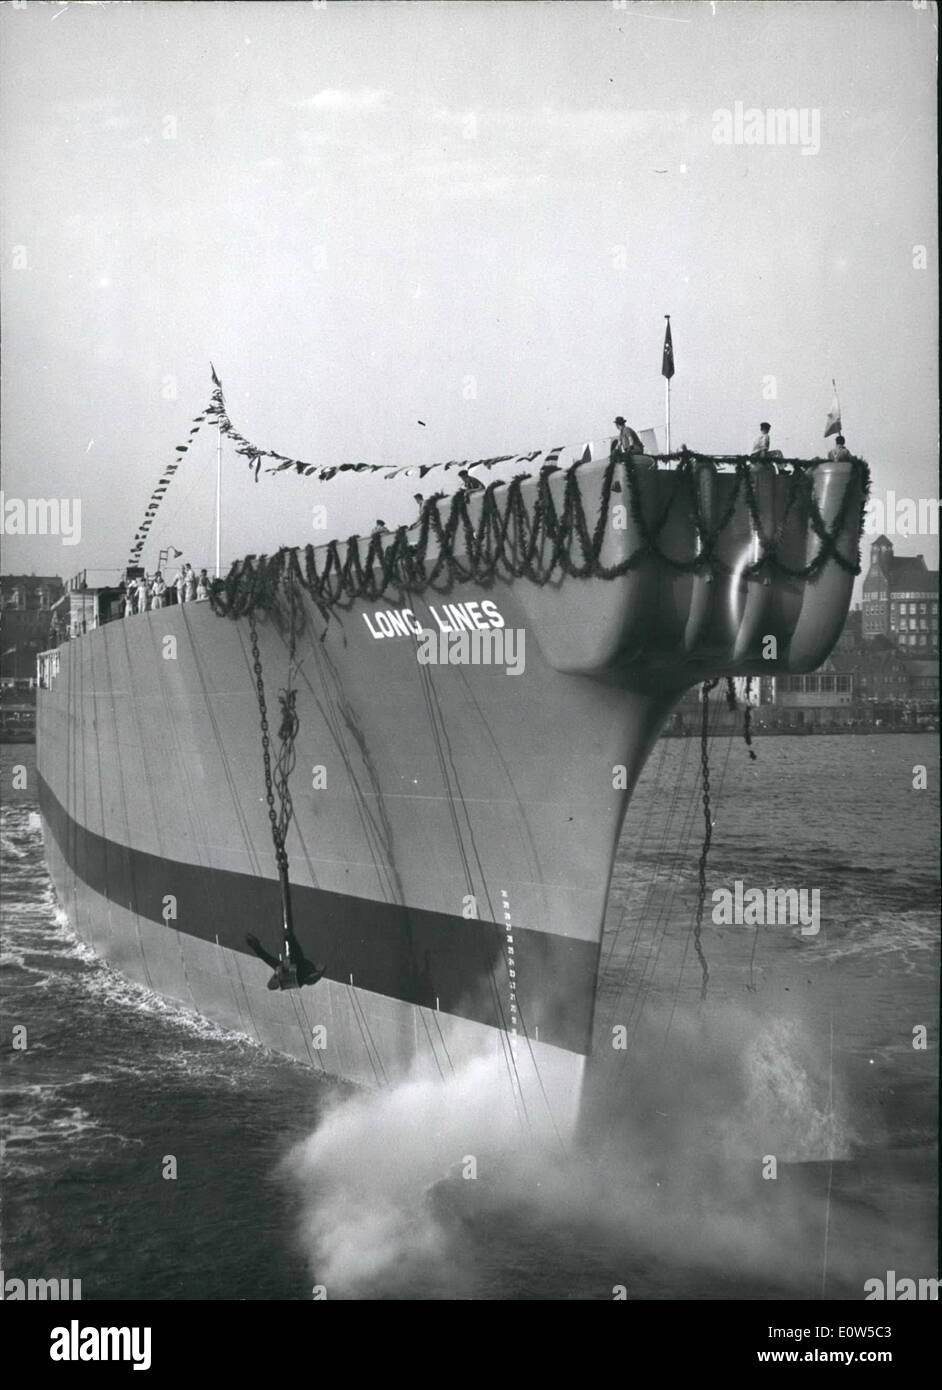 Sep. 09, 1961 - The world's largest cable-laying ship was launched..at Hamburgs Schlieker-Dockyard on Sept. 24th being christened with the name of ''Long Lines'' (Long Lines). Hamburg had won the contract to construct the Amendment Telephone & Technology Company's cable late against world wide competition from Japaneses British Spanish shipyards The new A.T. & T. Ship for 17,000 grt, is 510 feet long and will be one of fastest ships on the high seas in the specialized field of cable-laying at 7 or 8 knots compared with 3 1/2 knots per hour for other of this category Stock Photo